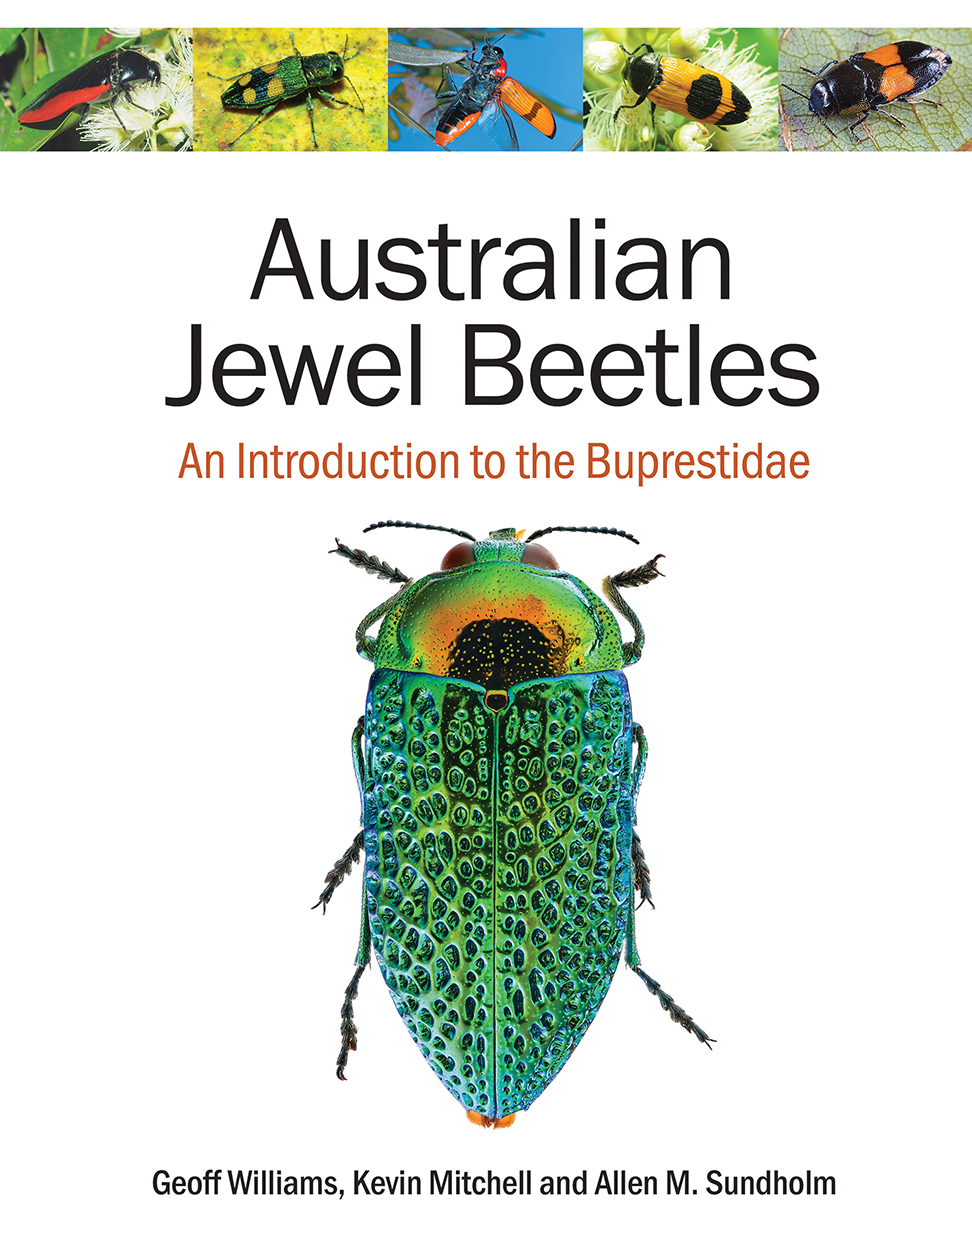 Cover of 'Australian Jewel Beetles', featuring a stunning metallic green jewel beetle on a white background, and thumbnails of a five other beetles wi